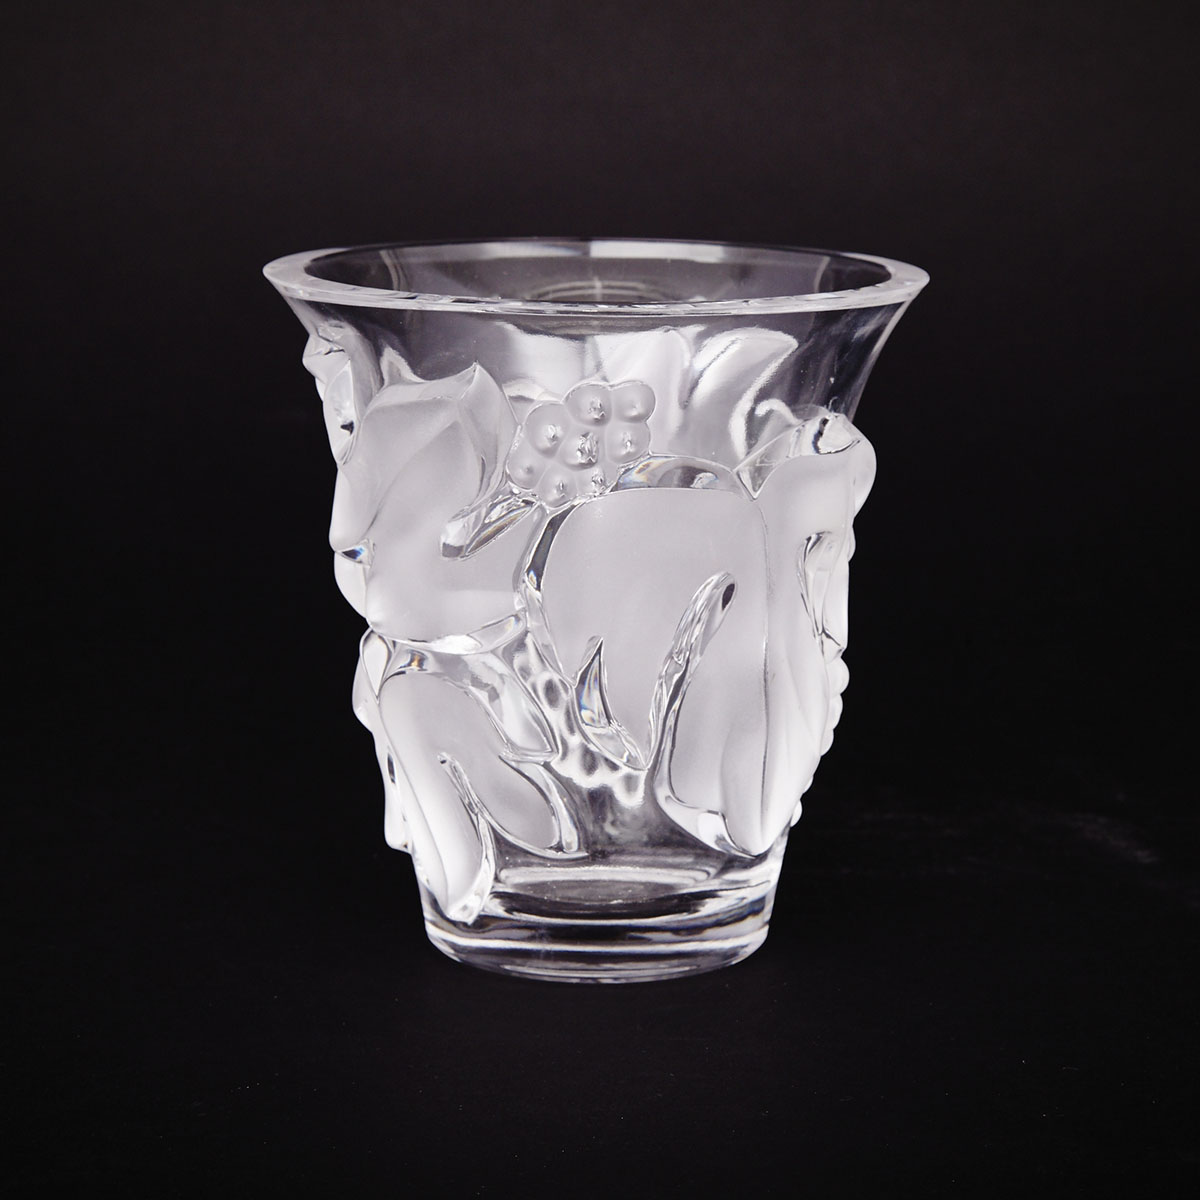 ‘Saumur’, Lalique Moulded and Partly Frosted Glass Vase, post-1945